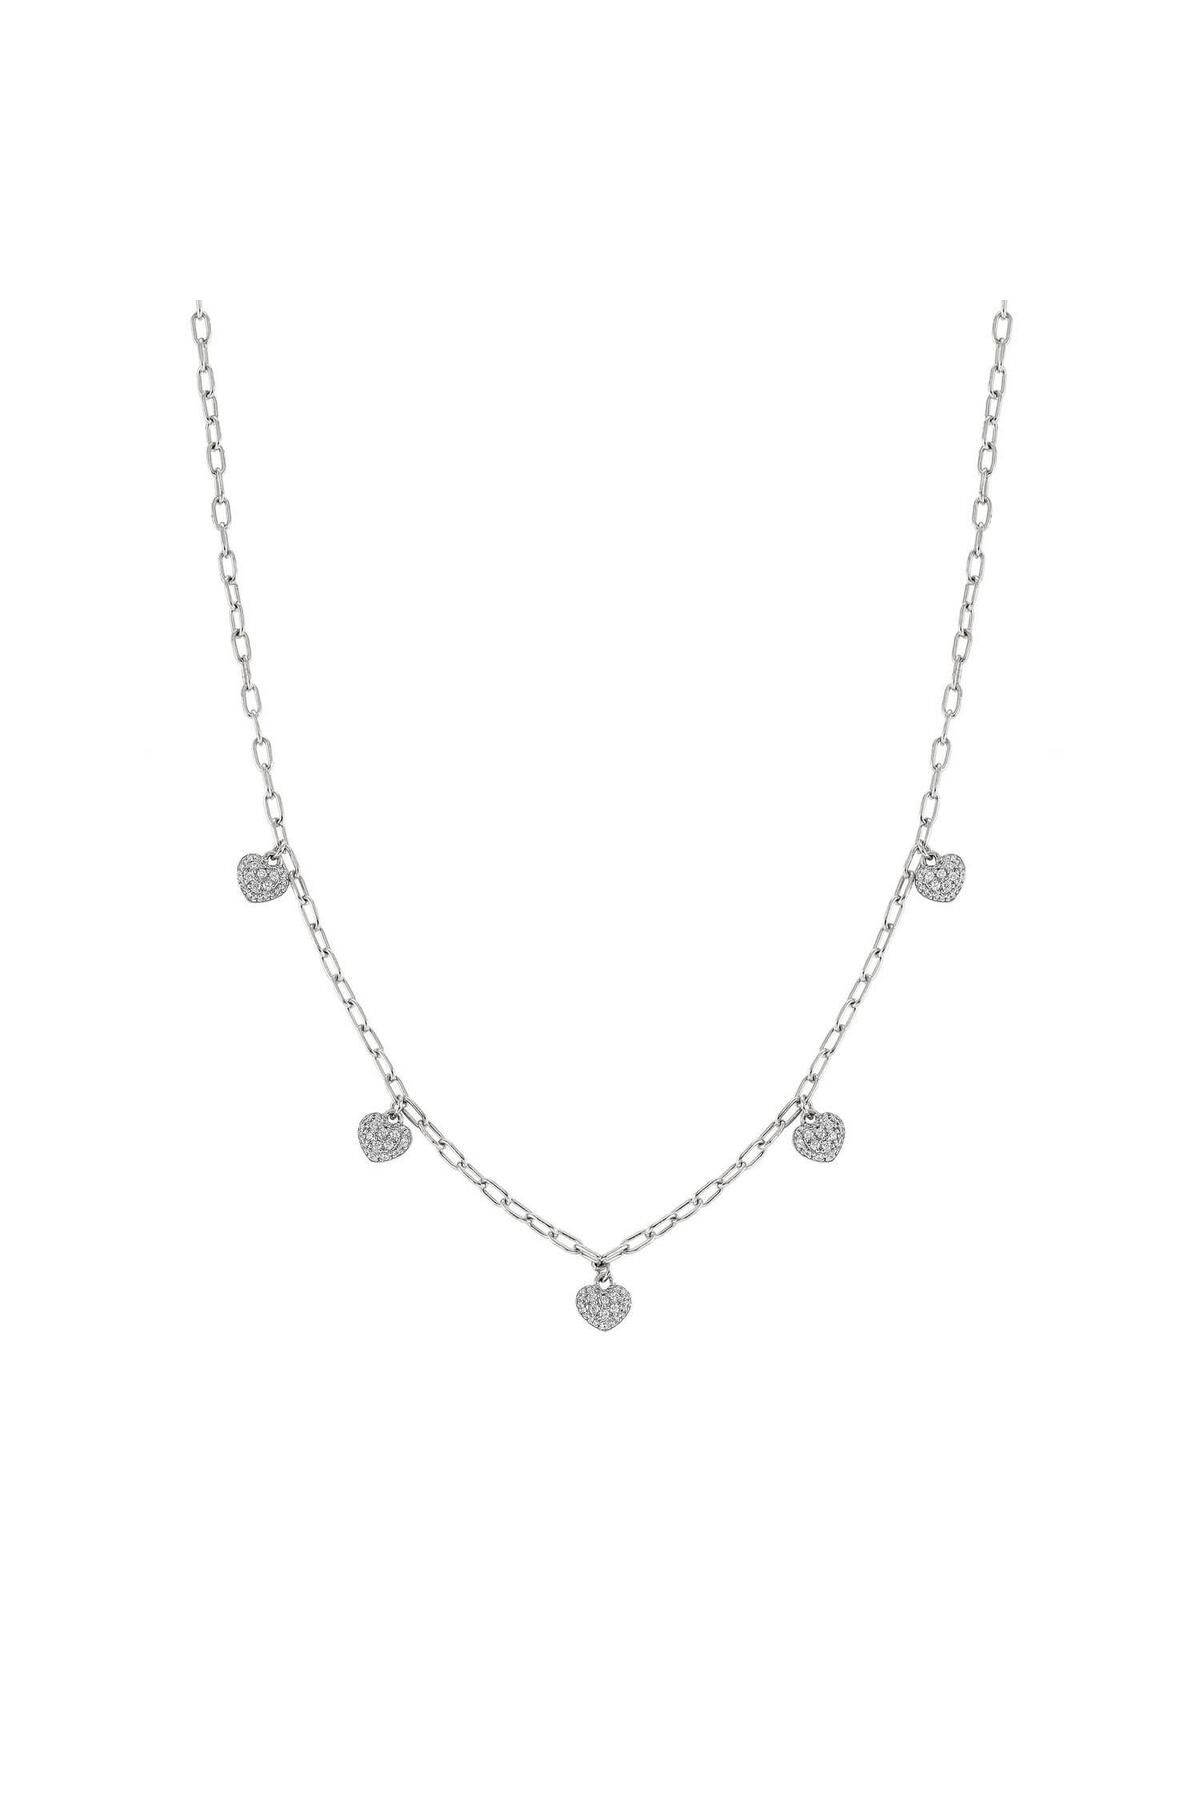 NOMİNATİON Easychıc Necklace Ed, Love In 925 Silver And Cubic Zirconia (rıch) (023_silver Whıte Heart)